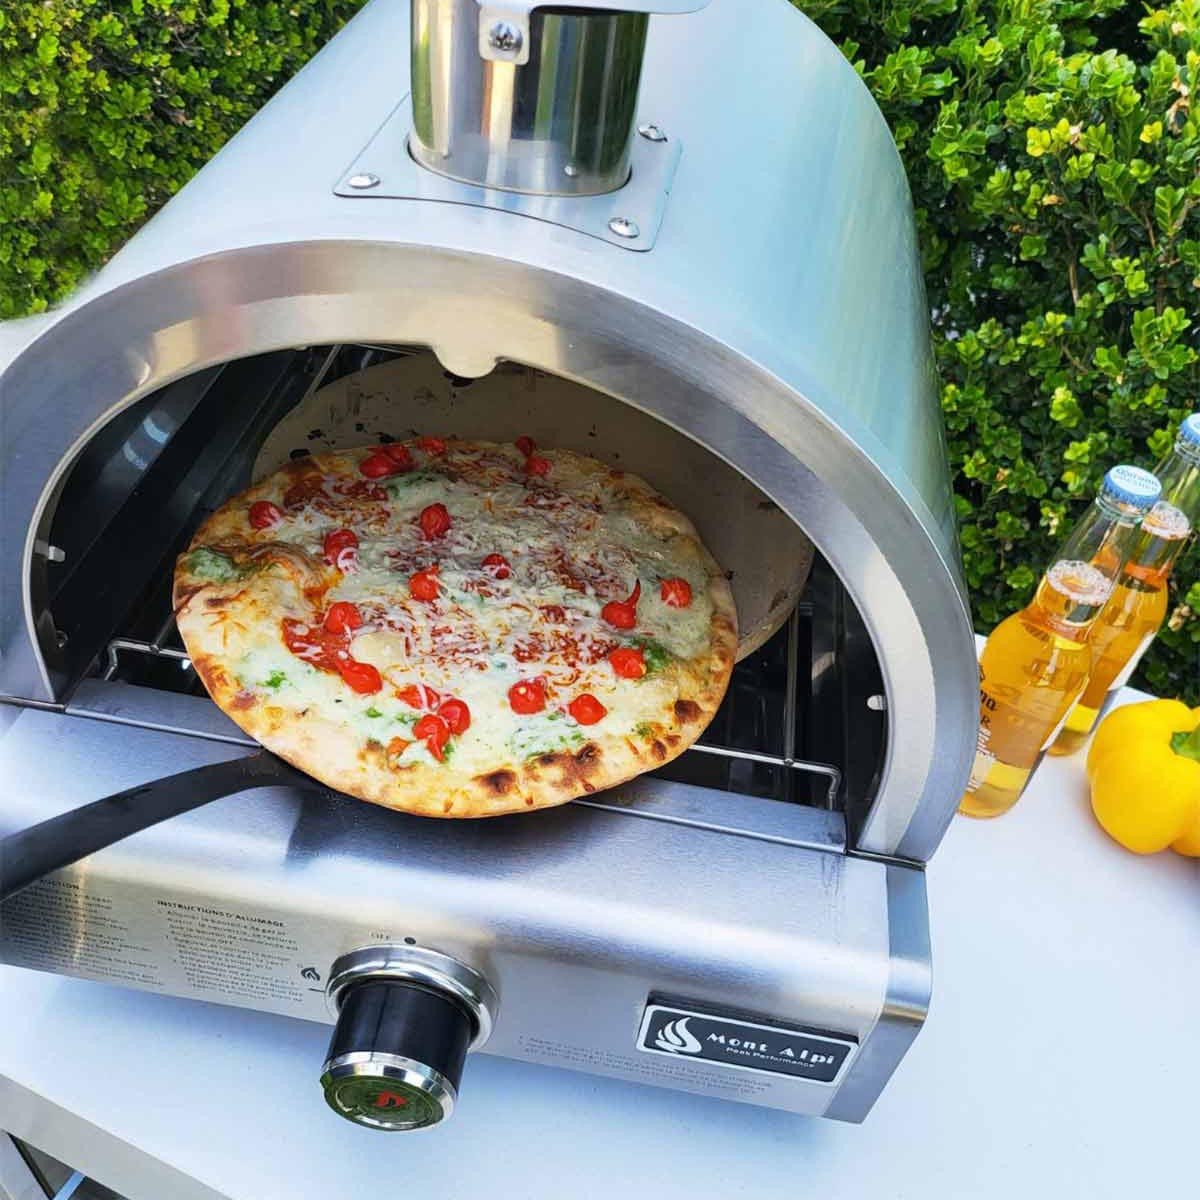 How To Cook Pizza In An Outdoor Gas Pizza Oven